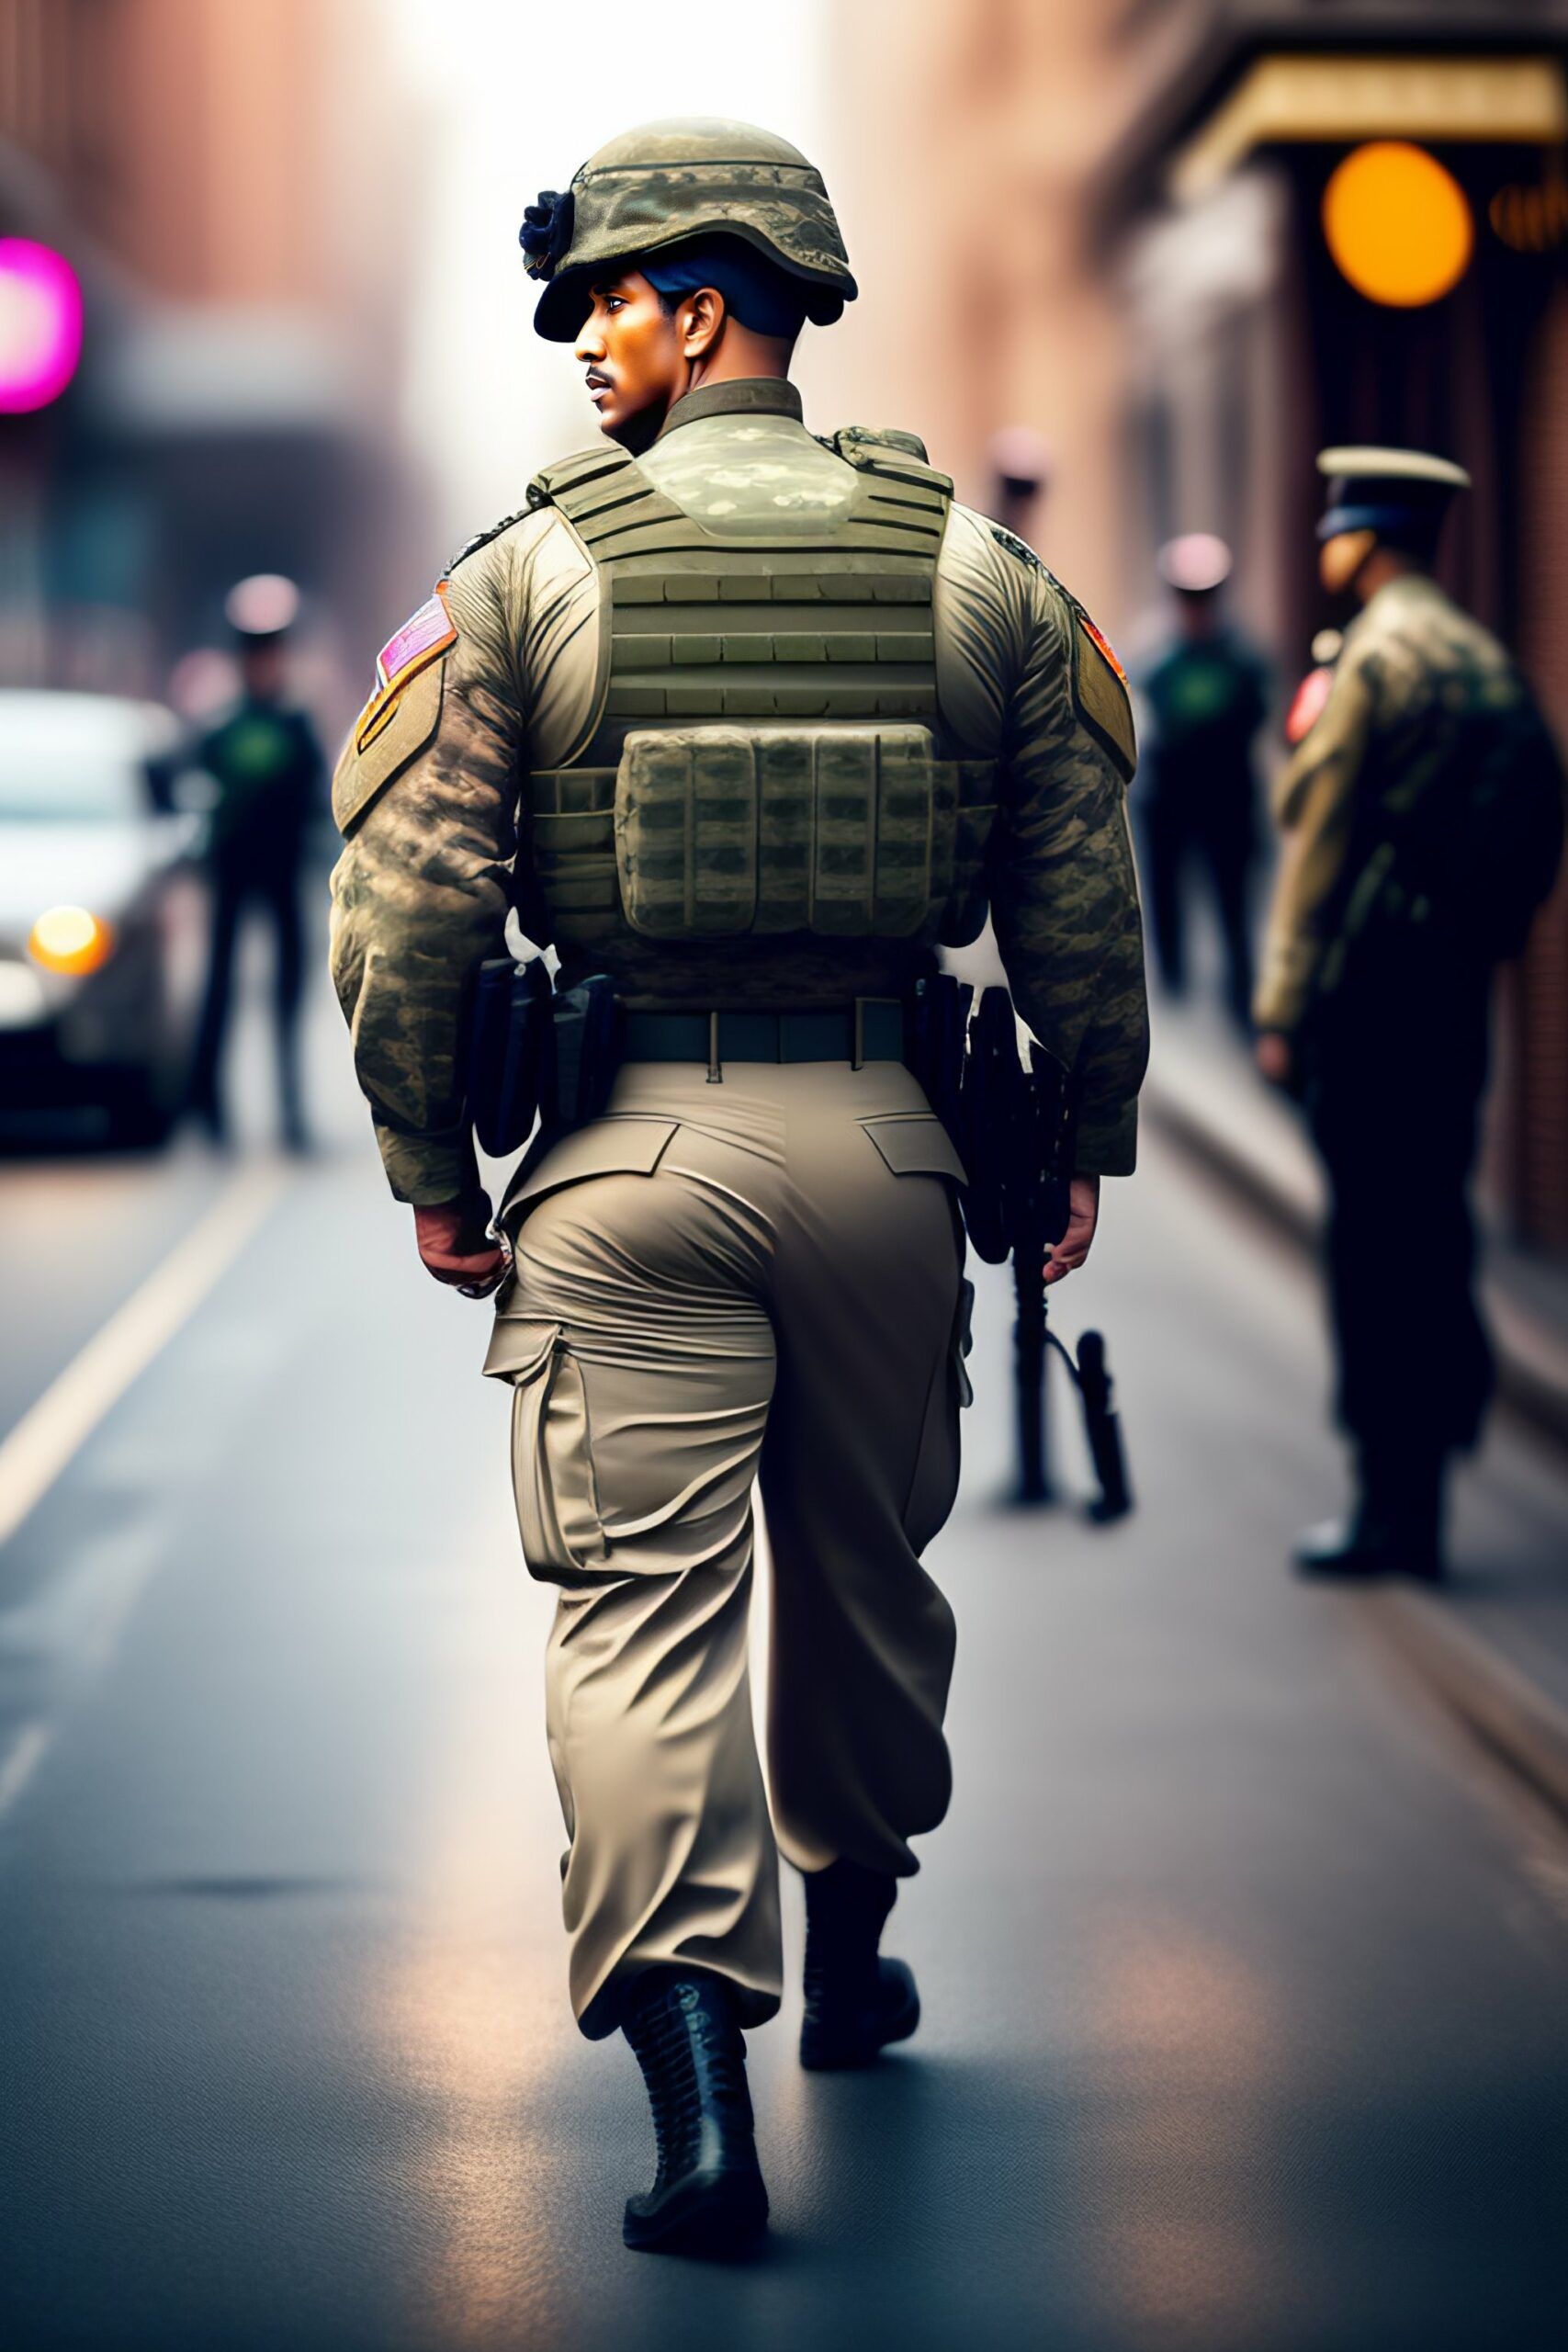 Tactical Product Stop How Tactical Clothing Can Help You Stay Safe in the Outdoors